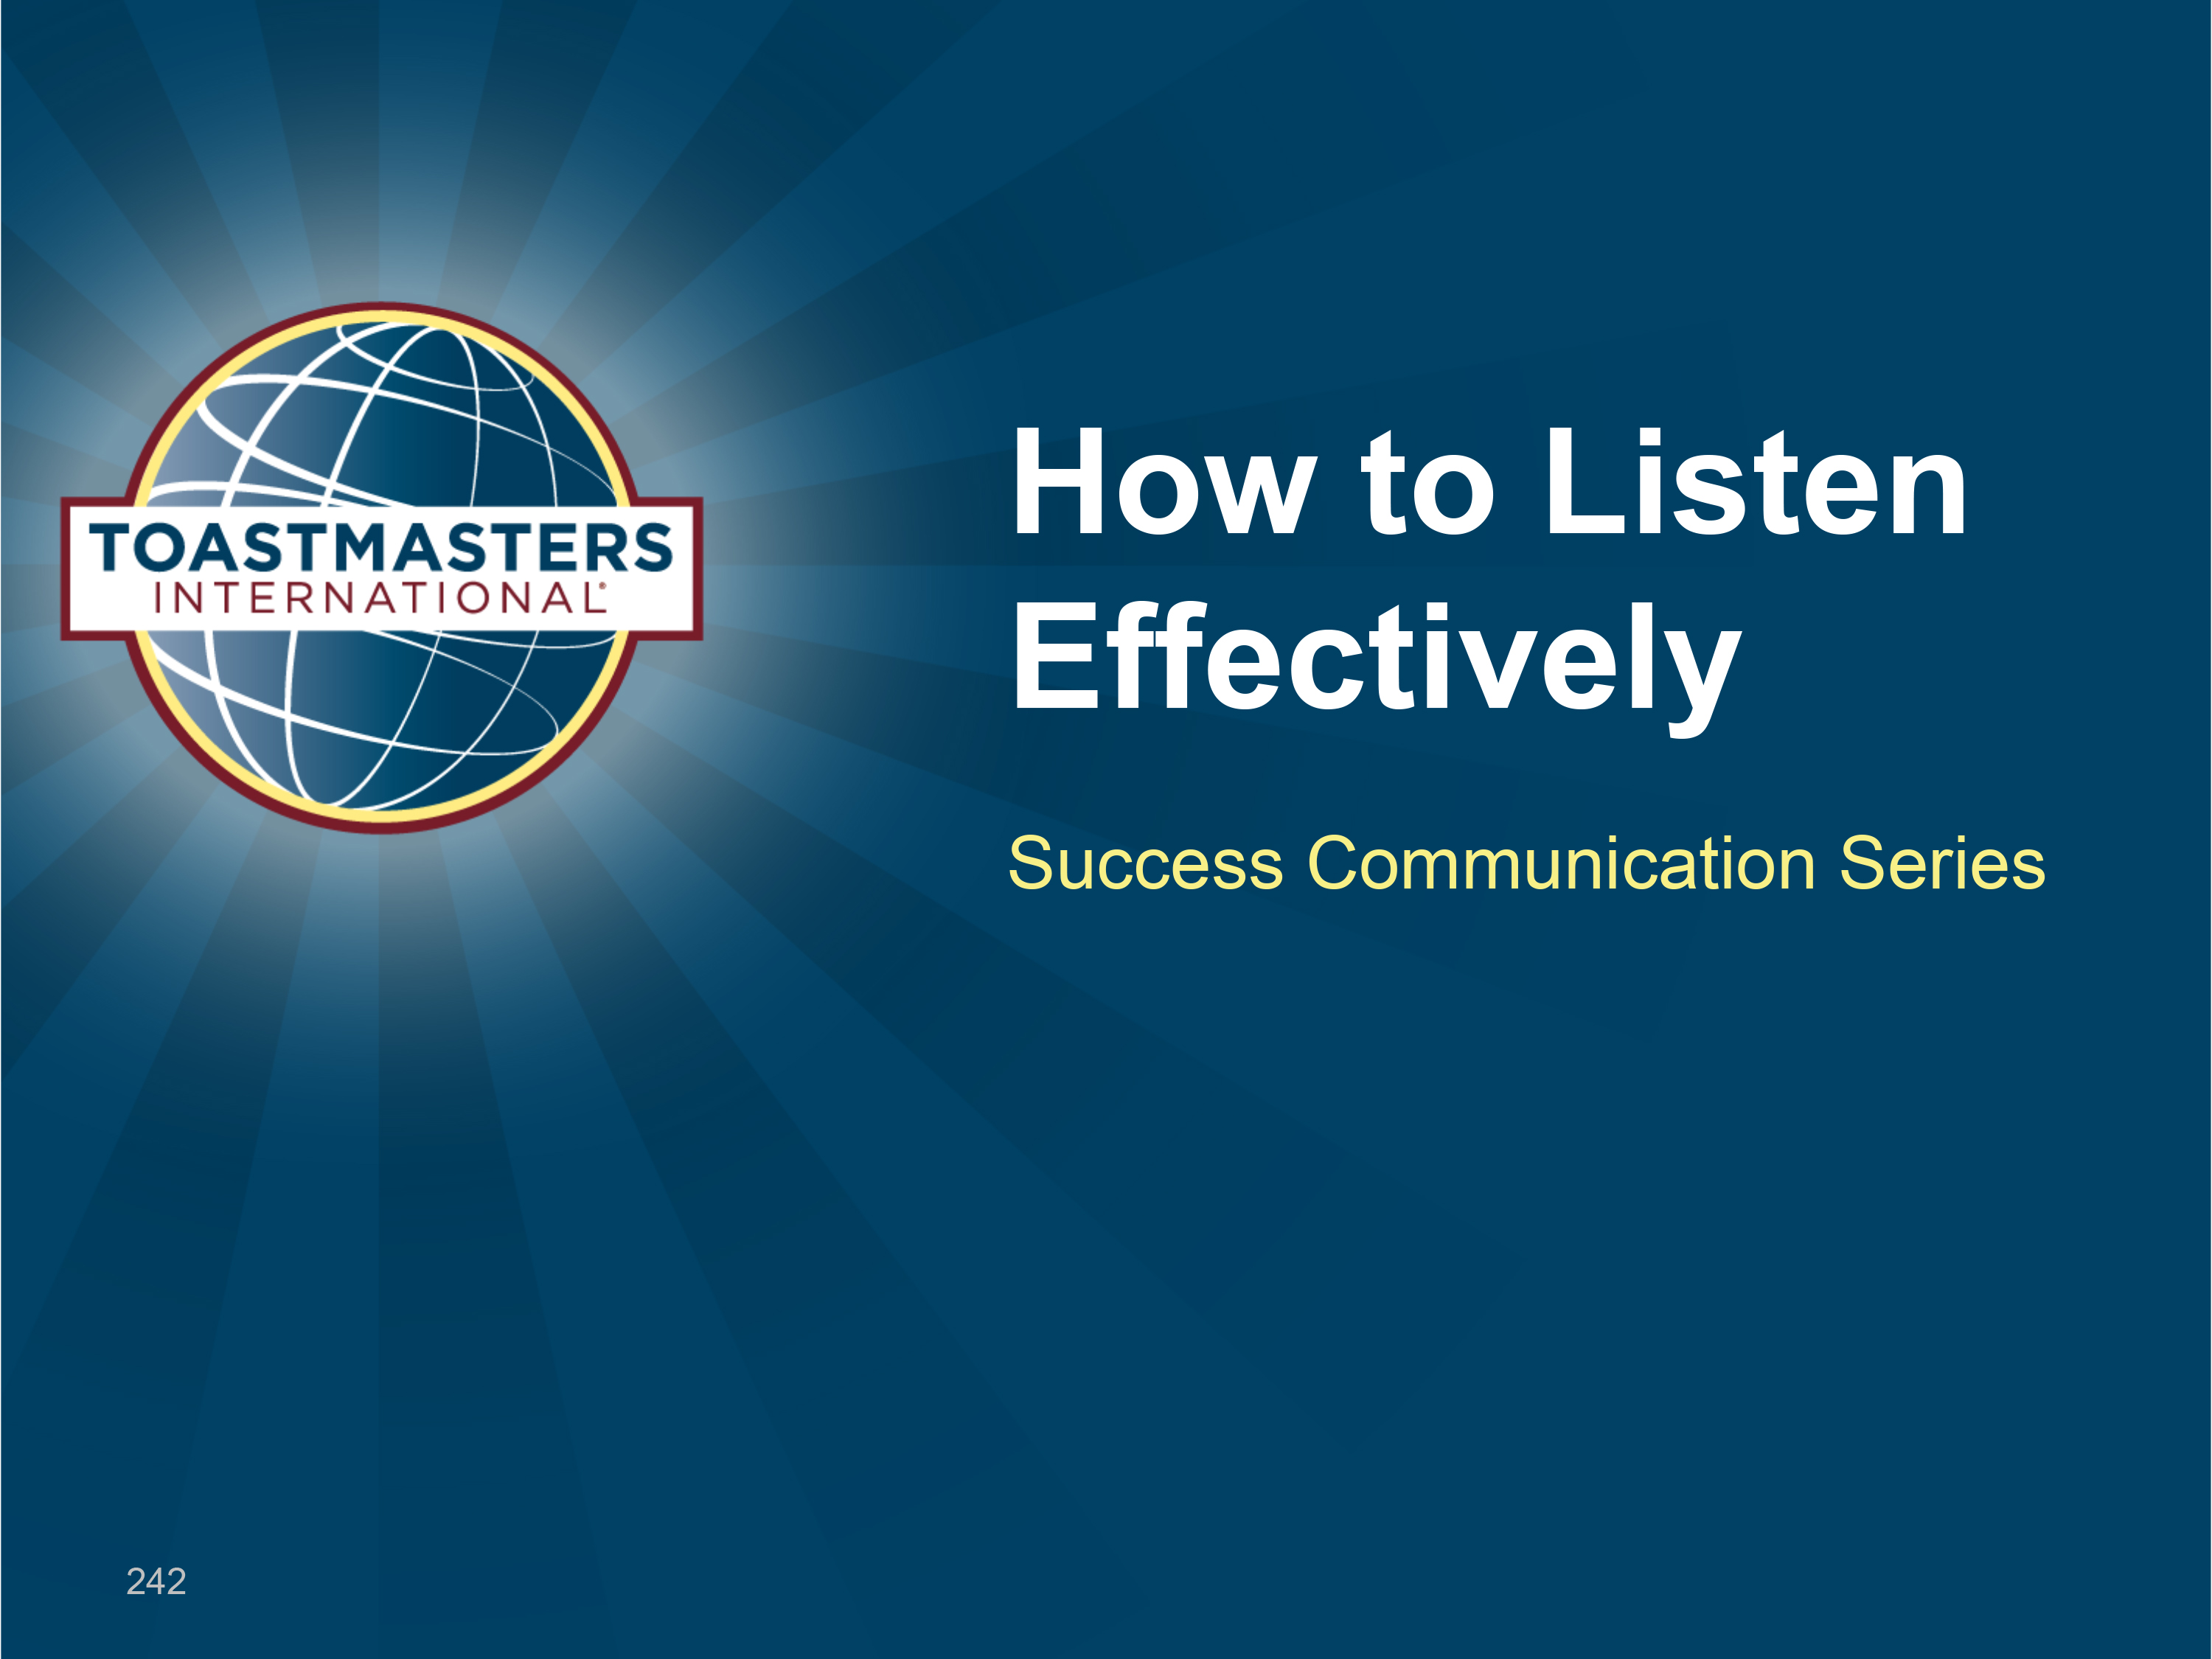 How to Listen Effectively Workshop (PPT)